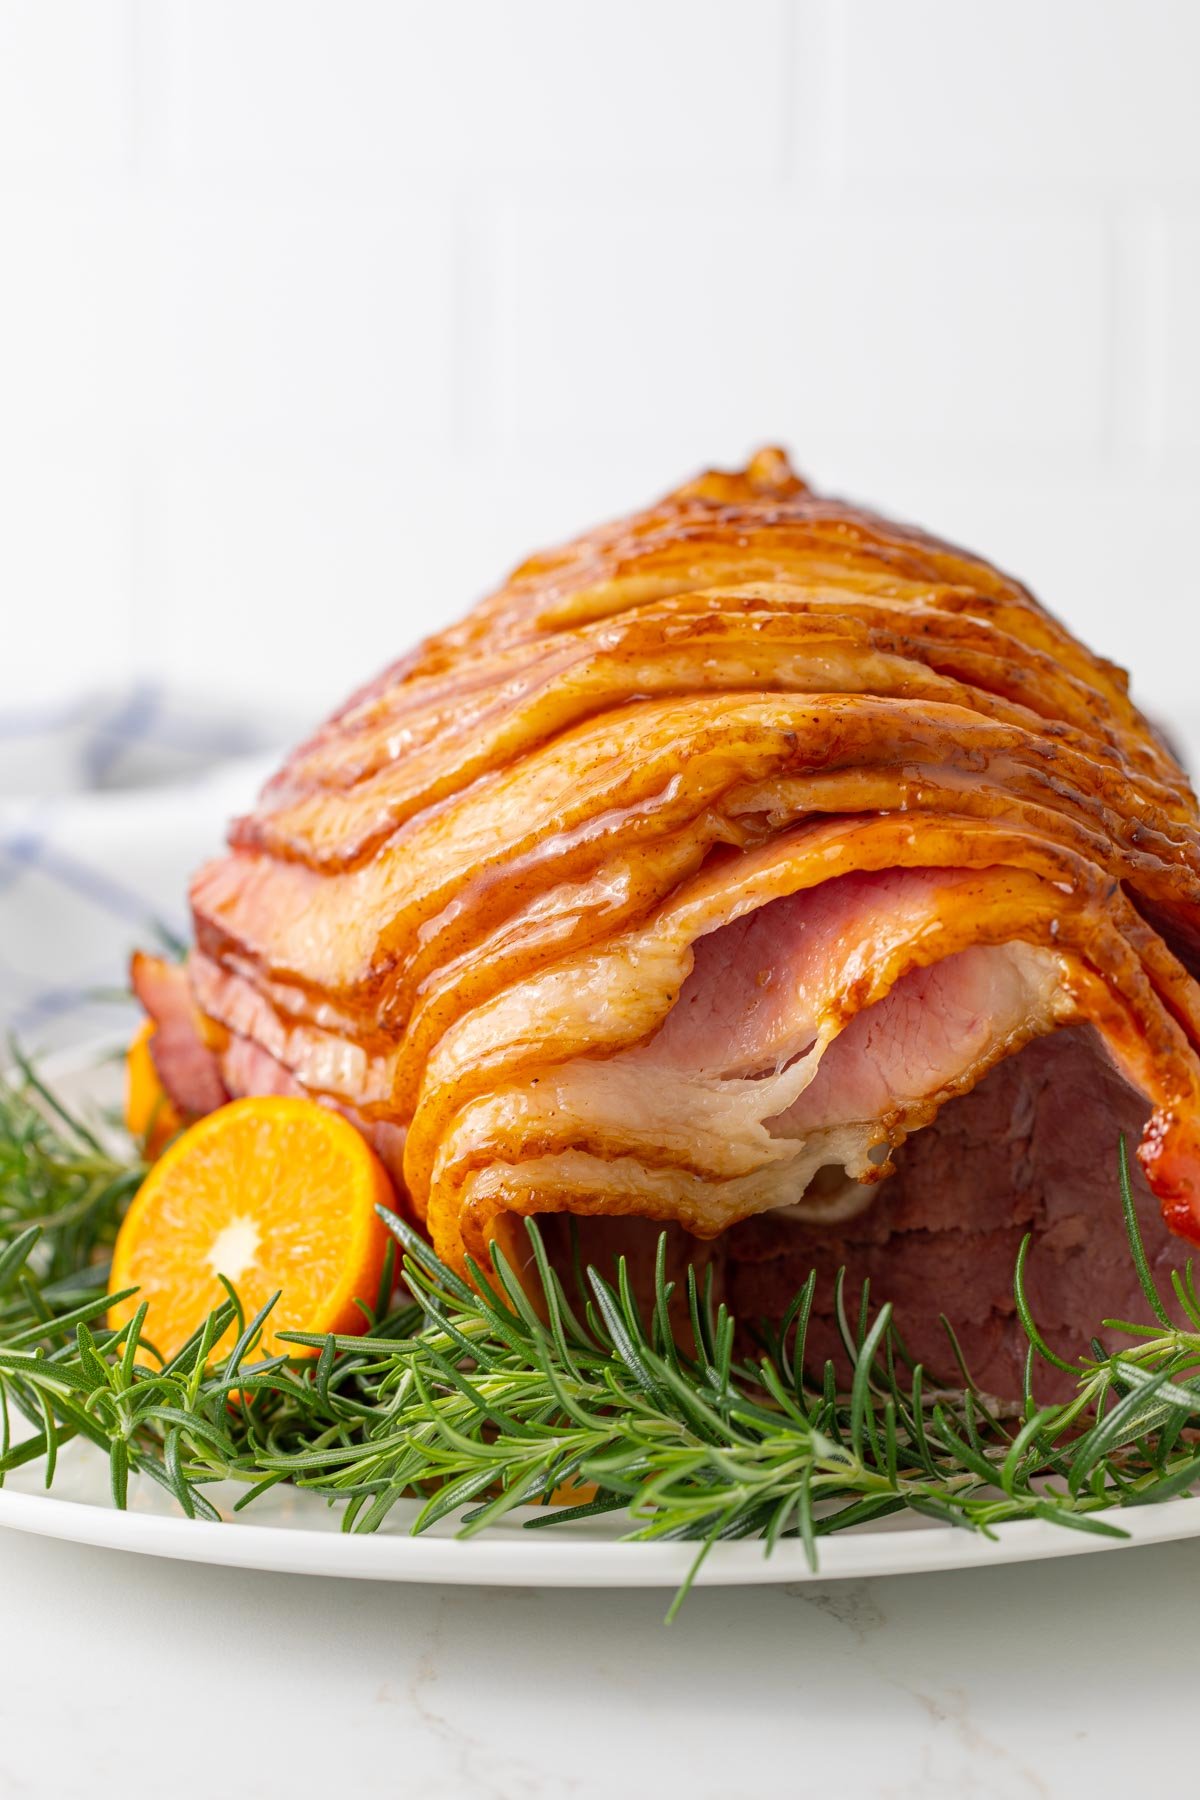 Front view of a glazed spiral ham on a white platter with rosemary and an orange.